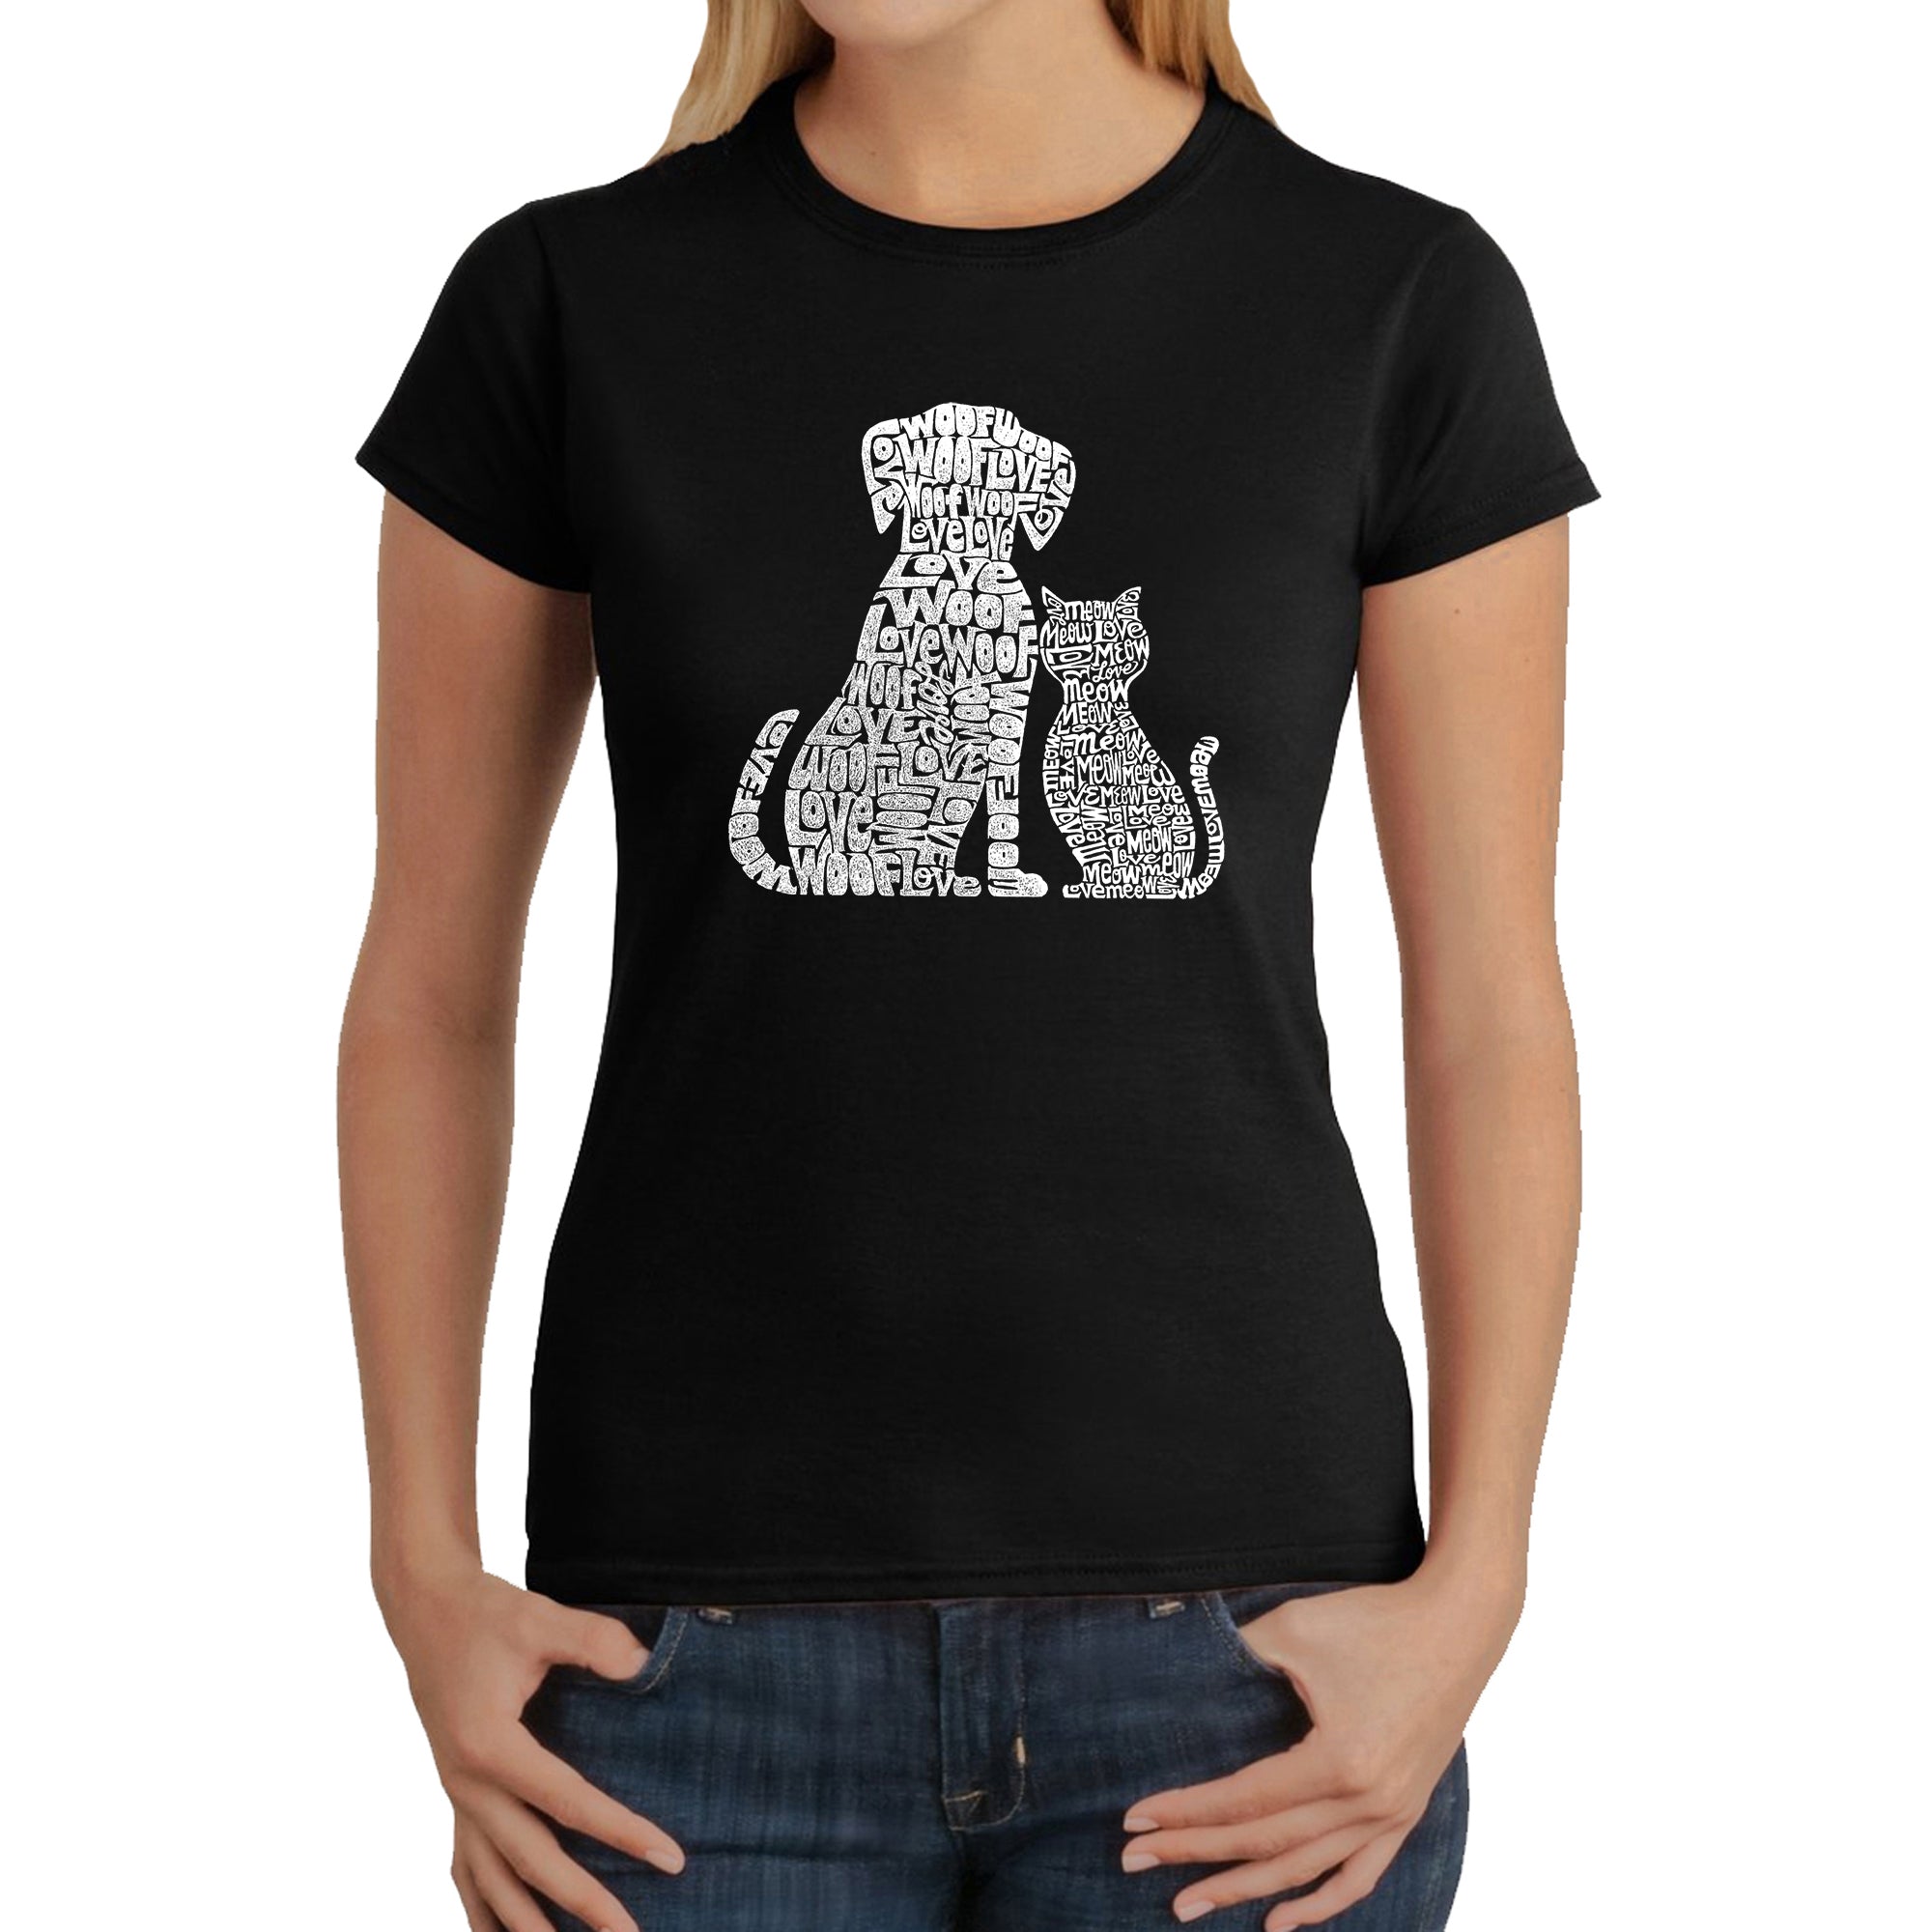 Dogs And Cats - Women's Word Art T-Shirt - Kelly - Small